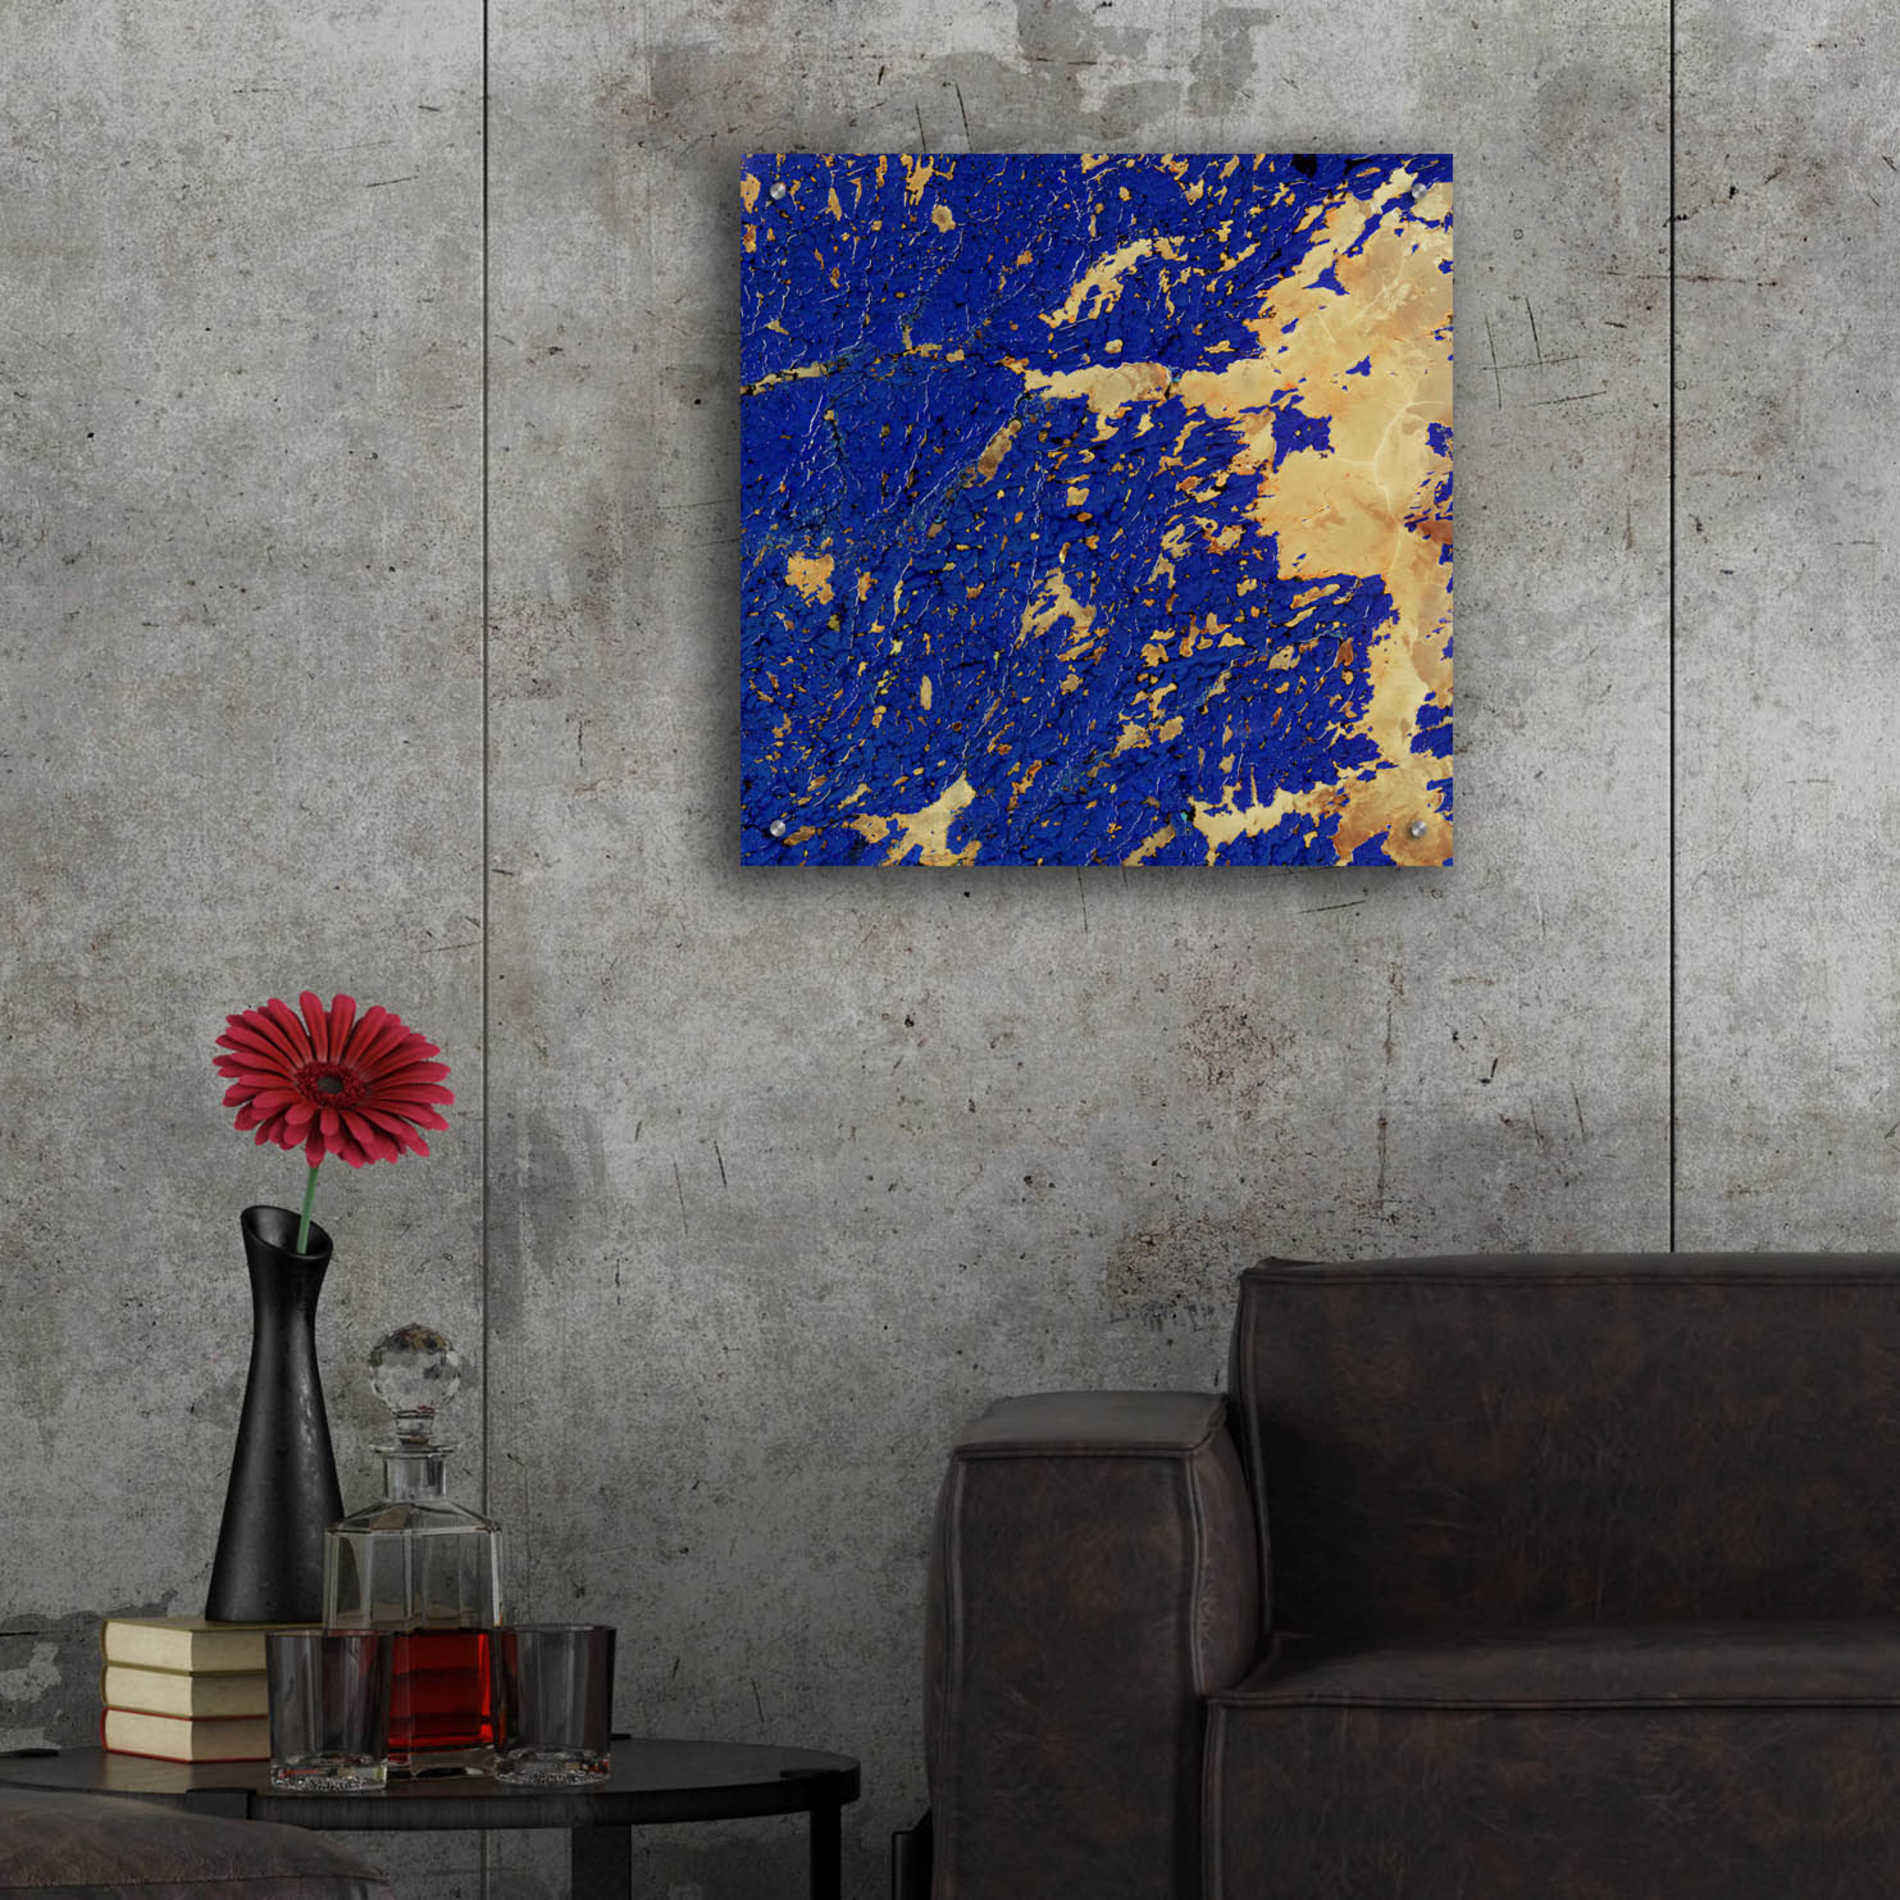 Epic Art 'Earth as Art: Copper and Blue,' Acrylic Glass Wall Art,24x24